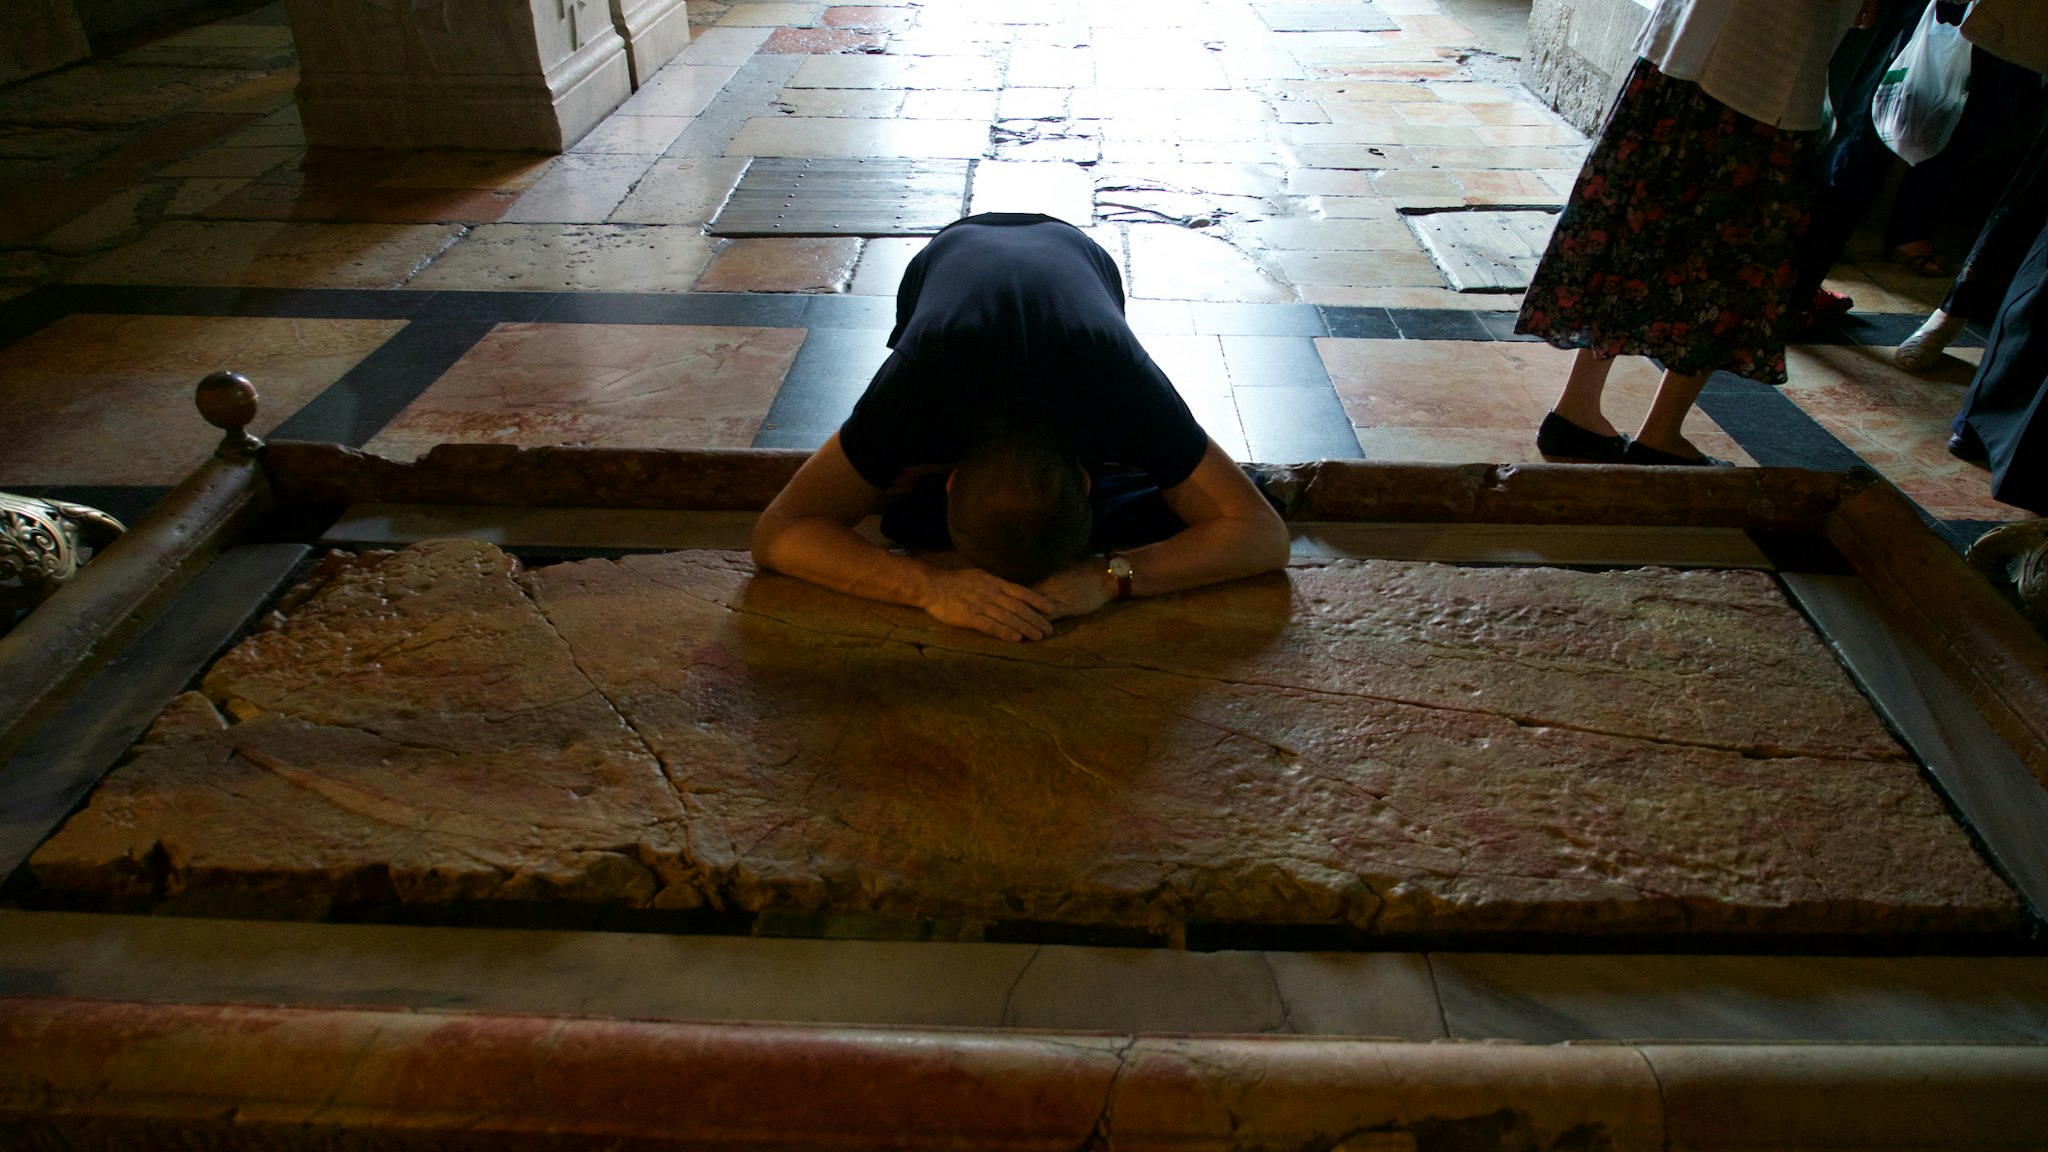 Stone of the Anointing (or Unction) in Church of the Holy Sepulchre, Pilgrim praying, Old City of Jerusalem (Unesco World Heritage List, 1981), Israel.